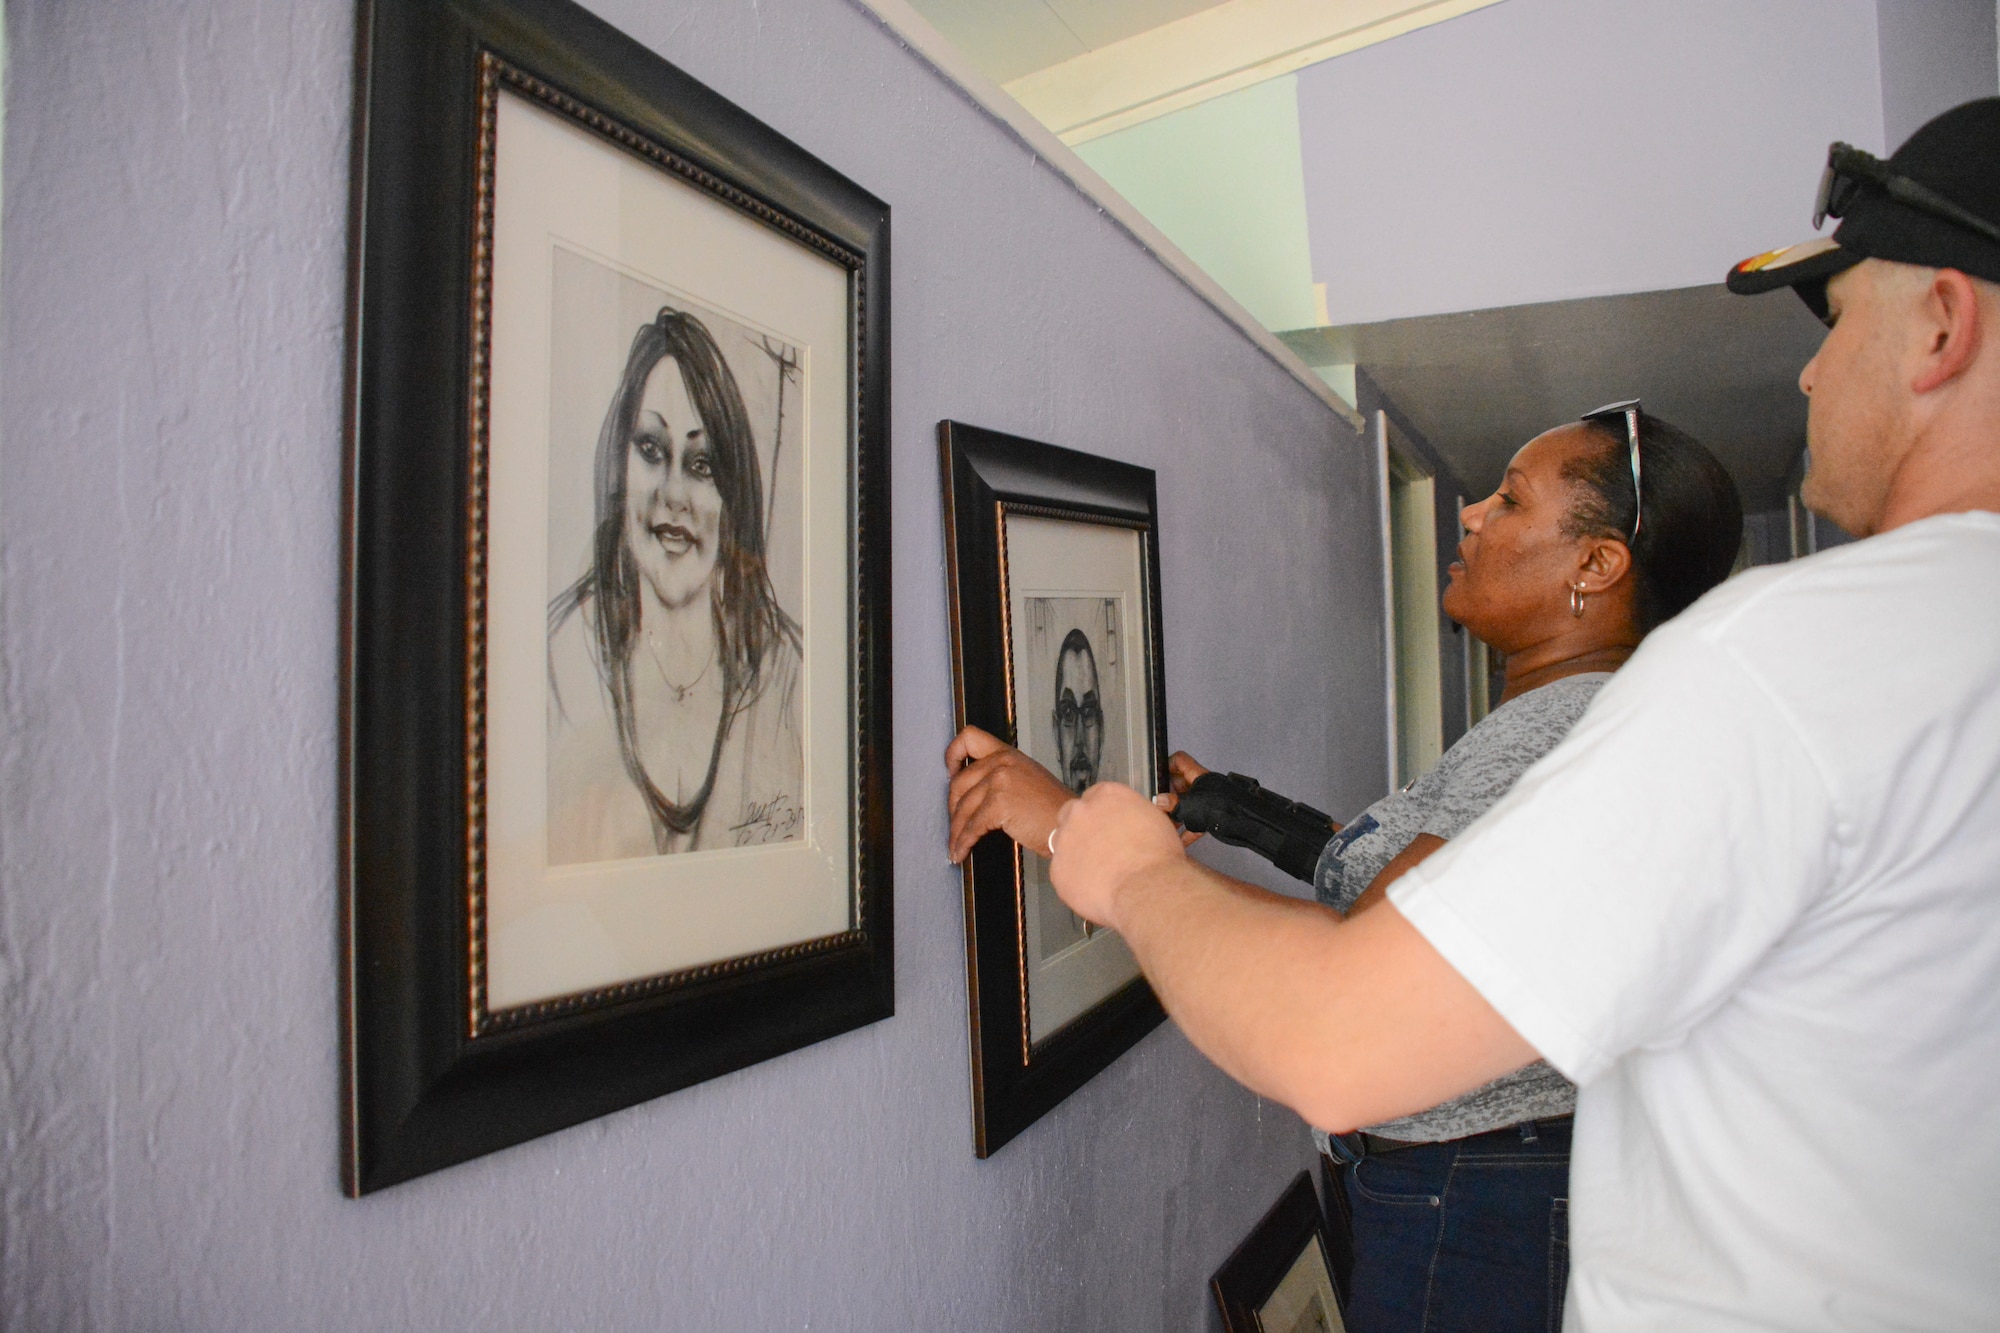 Volunteers hang a picture of the late Airman 1st Class Chris Evans May 9 at the Evans’ residence. The photos were framed and displayed in the center of the home. (U.S. Air Force photo by Airman 1st Class Amber Carter)

